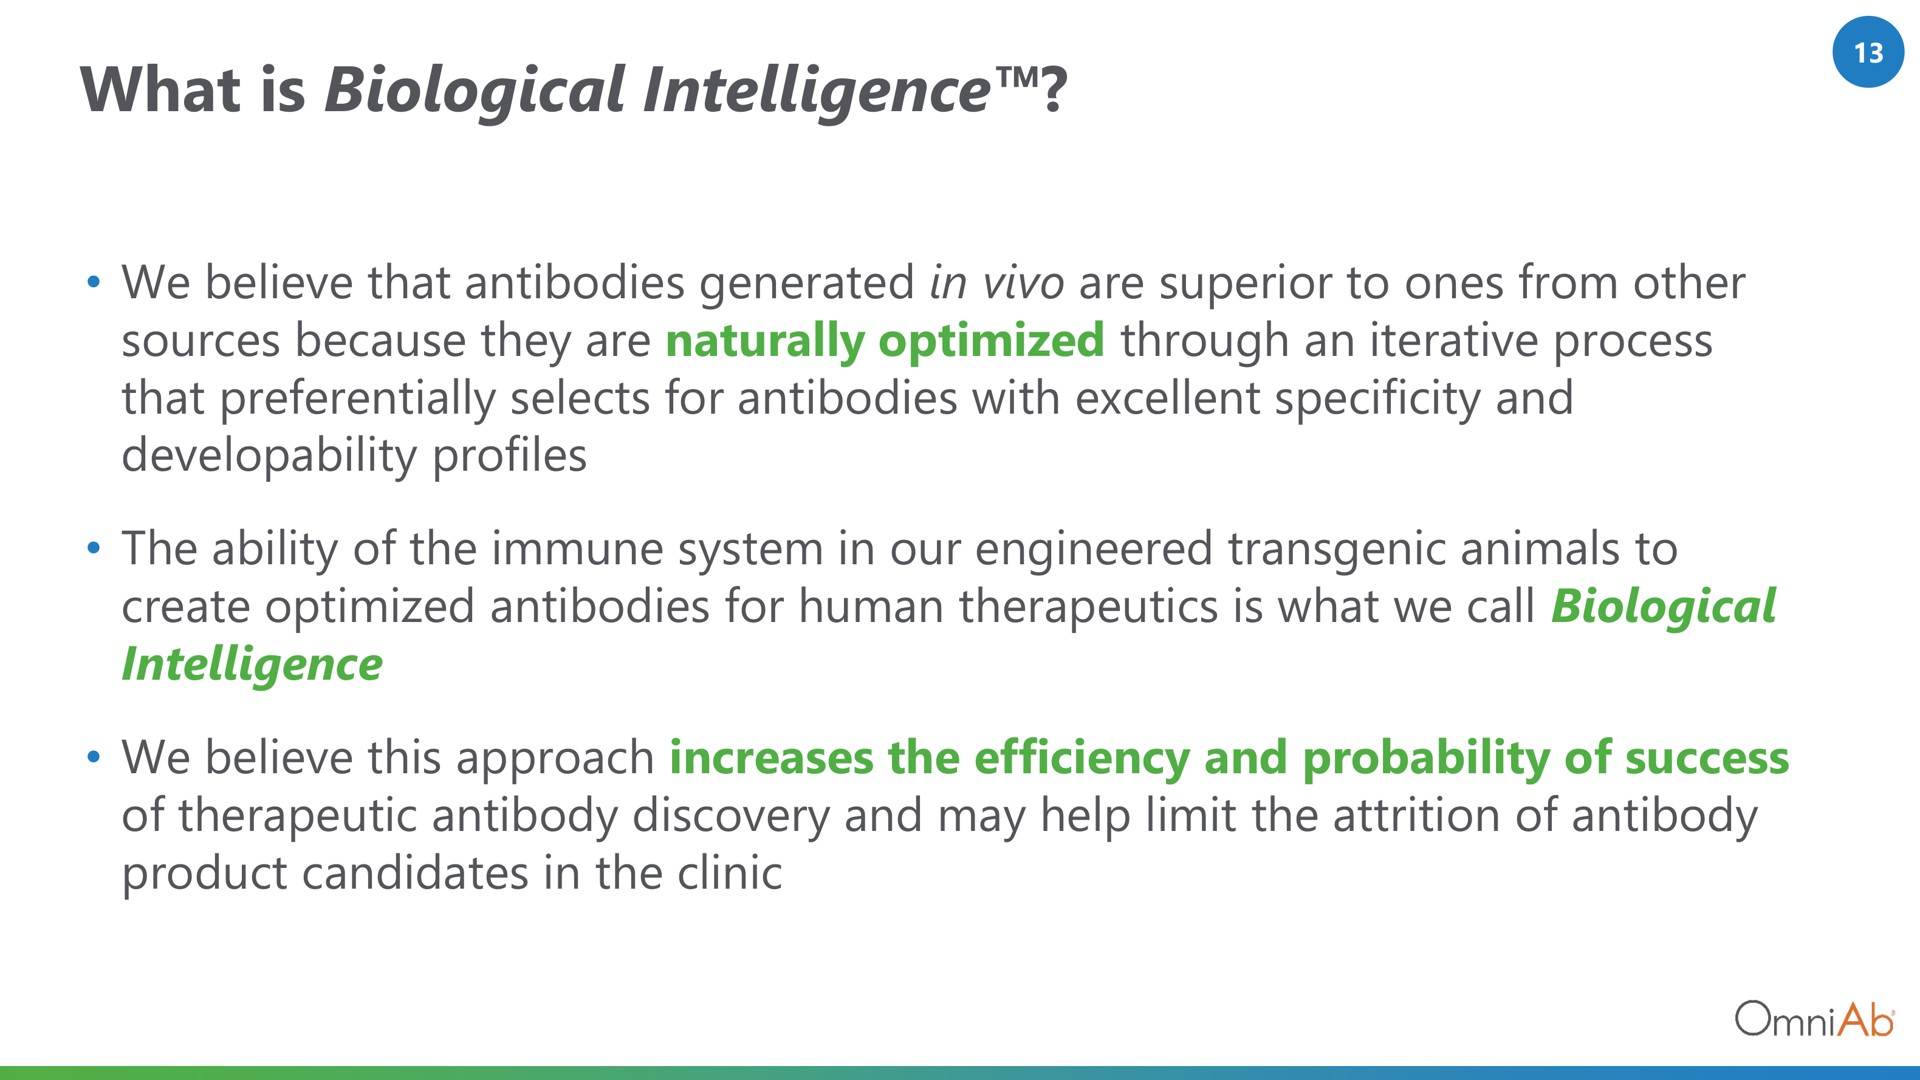 what is biological intelligence we believe that antibodies generated in are superior to ones from other sources because they are naturally optimized through an iterative process that preferentially selects for antibodies with excellent specificity and developability profiles the ability of the immune system in our engineered animals to create optimized antibodies for human therapeutics is what we call biological intelligence we believe this approach increases the efficiency and probability of success of therapeutic antibody discovery and may help limit the attrition of antibody product candidates in the clinic | OmniAb